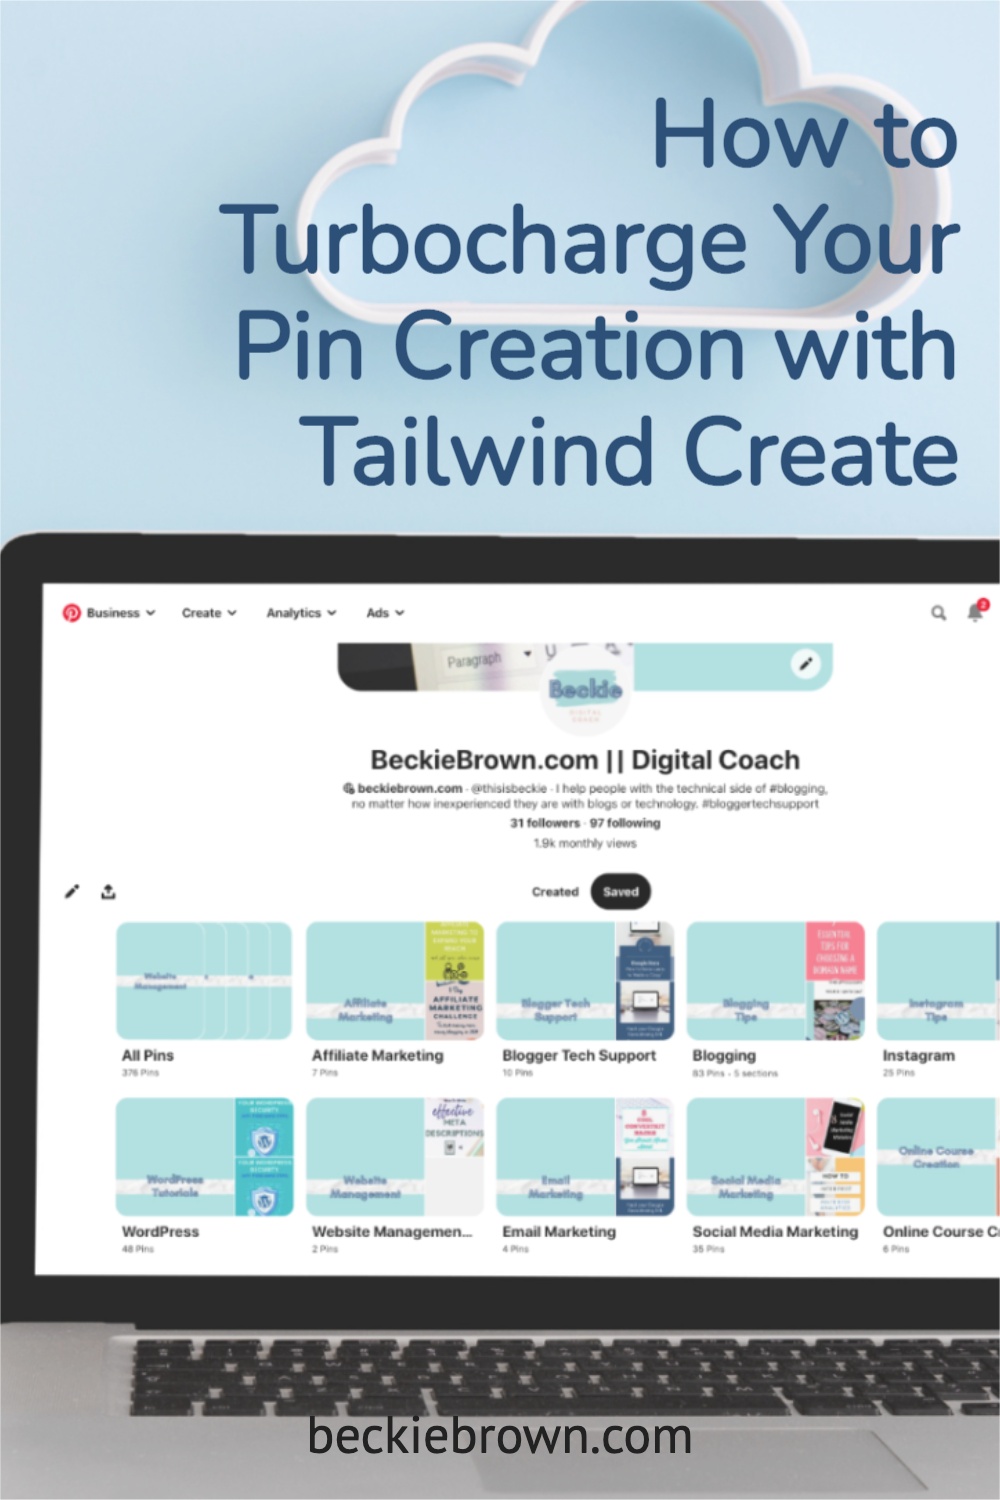 Turbocharge Your Pin Creation with Tailwind Create